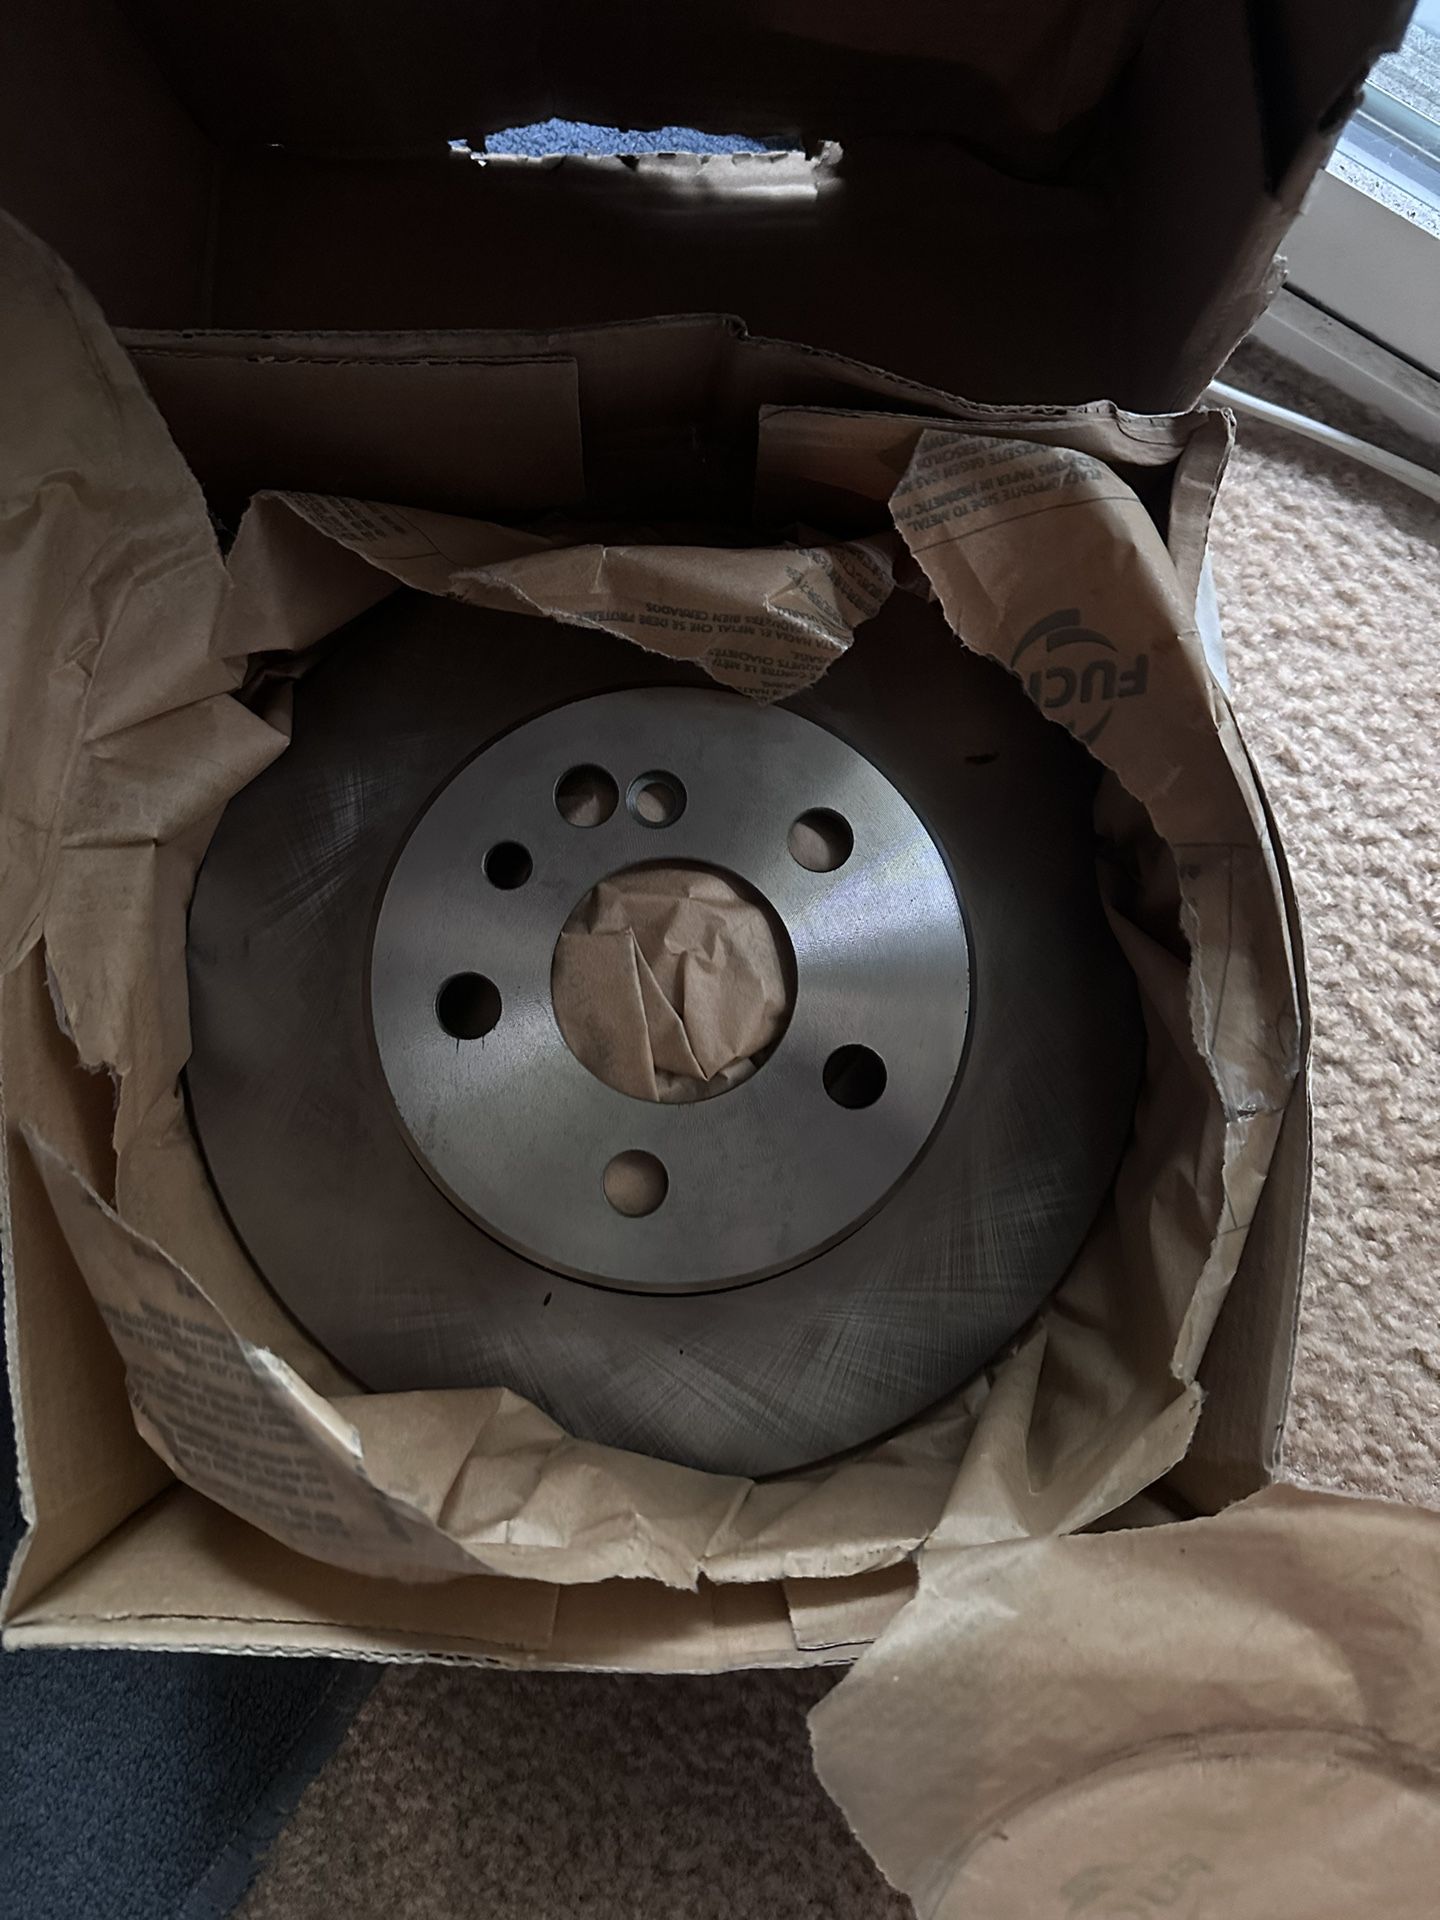 New Mercedes Benz (2) Brake Discs Part-1(contact info removed)12